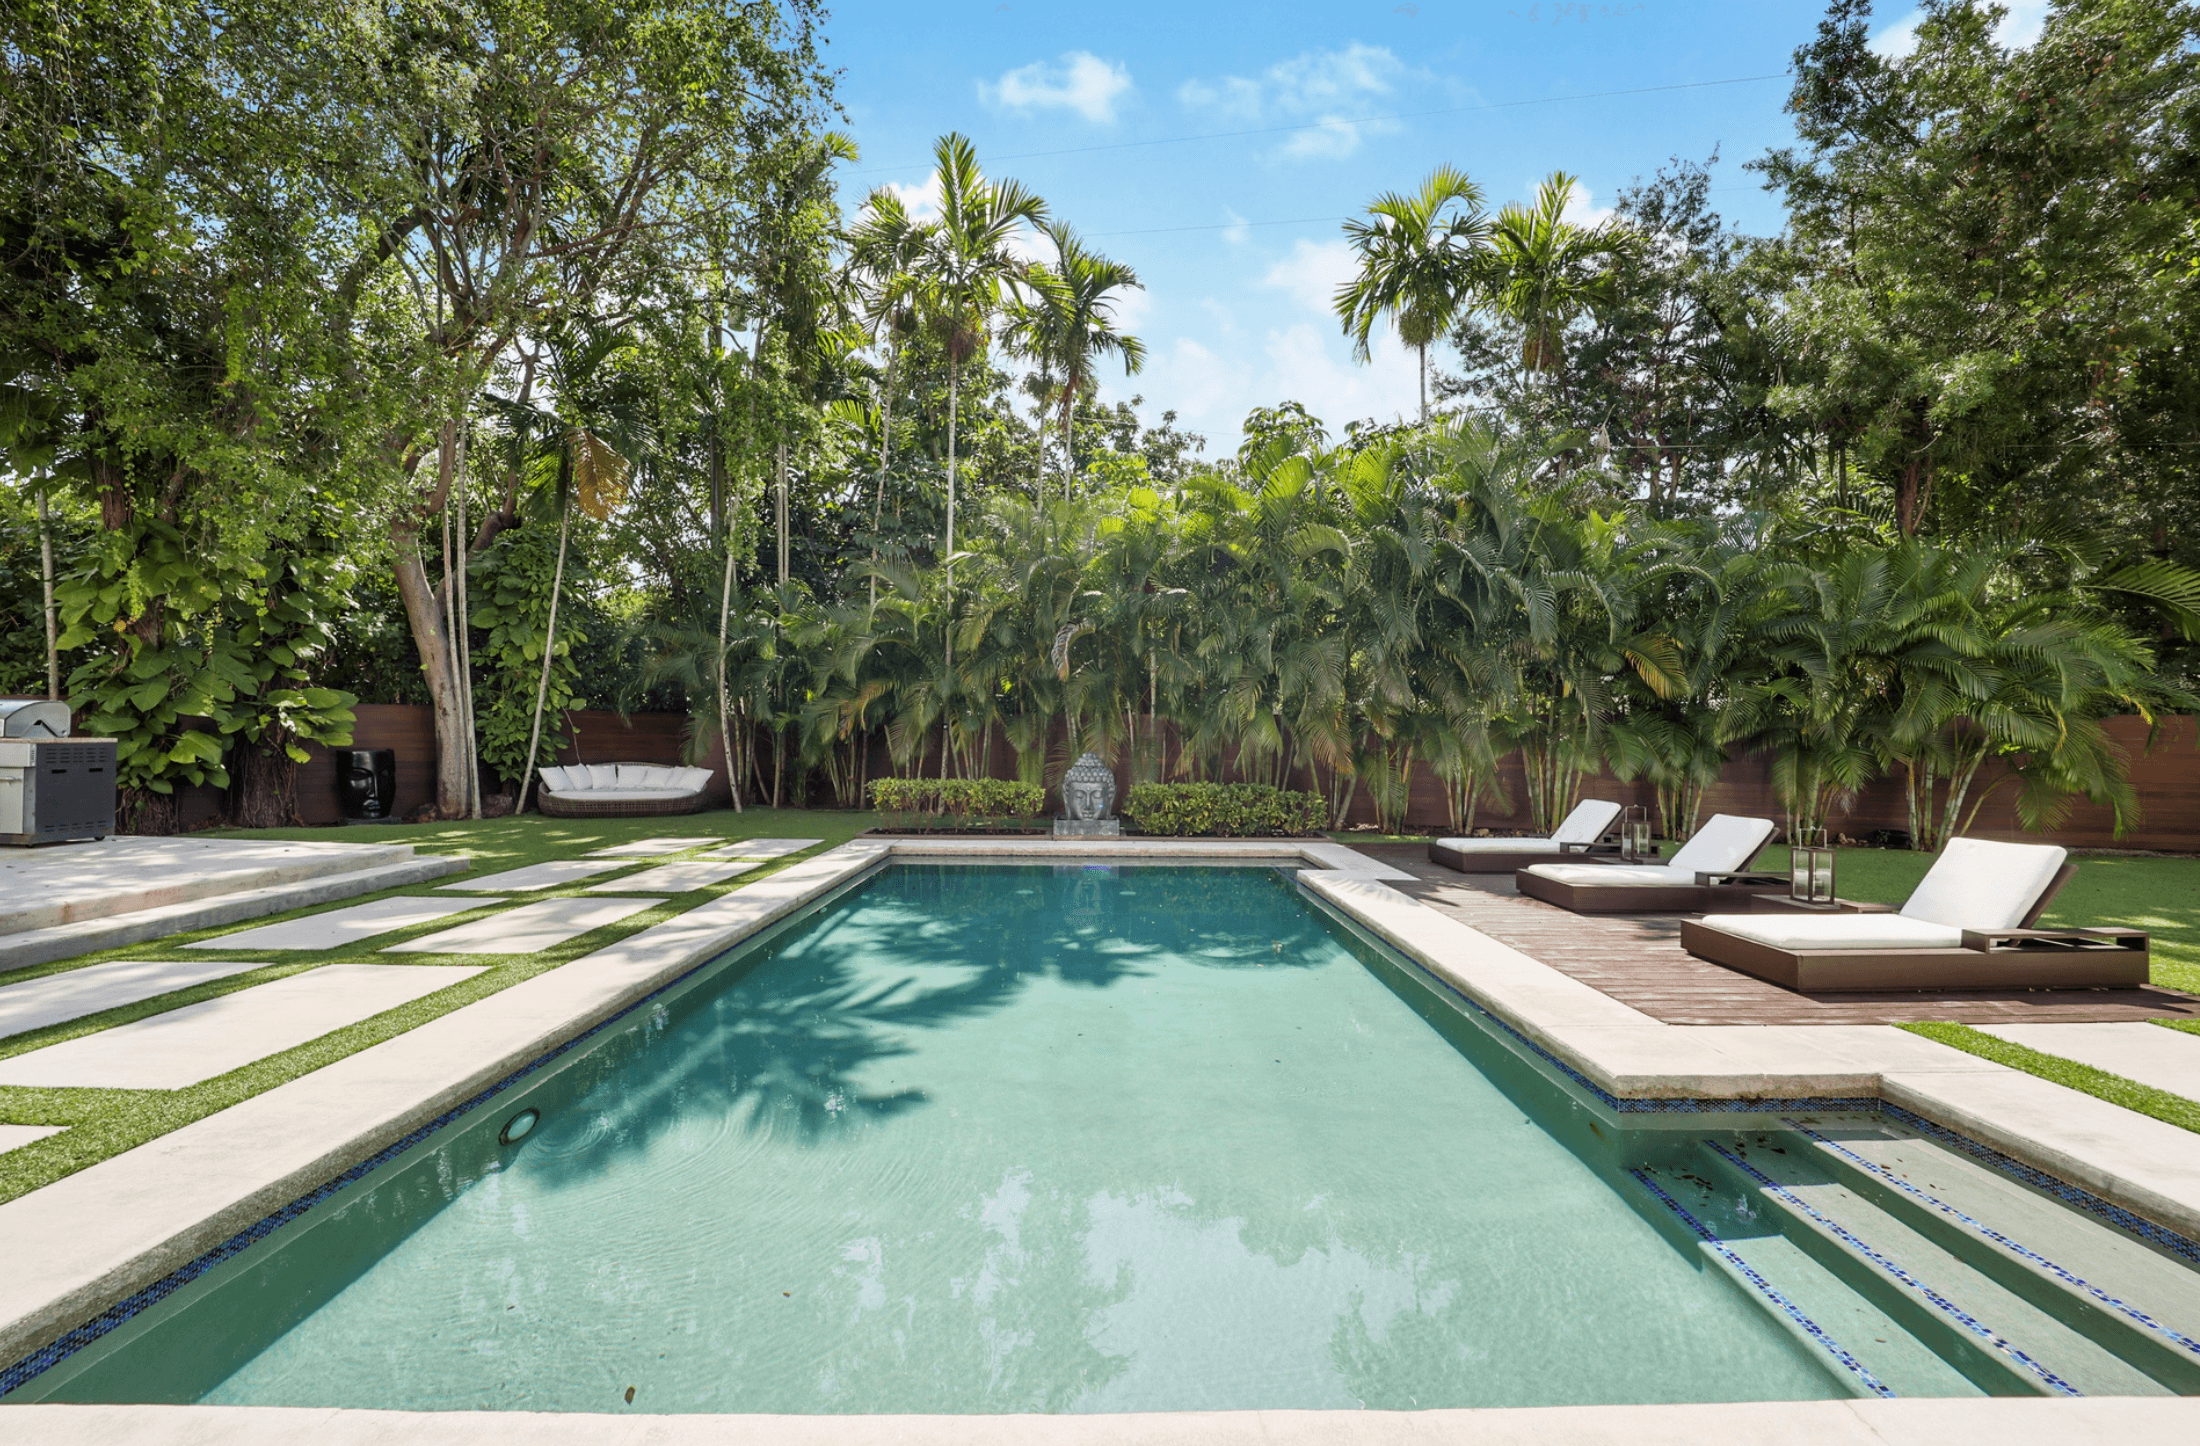 Miami Modern House for Rent | 5 bed 7 bath Pool | Double Lot| 5,000 sq ft | $49,000.00